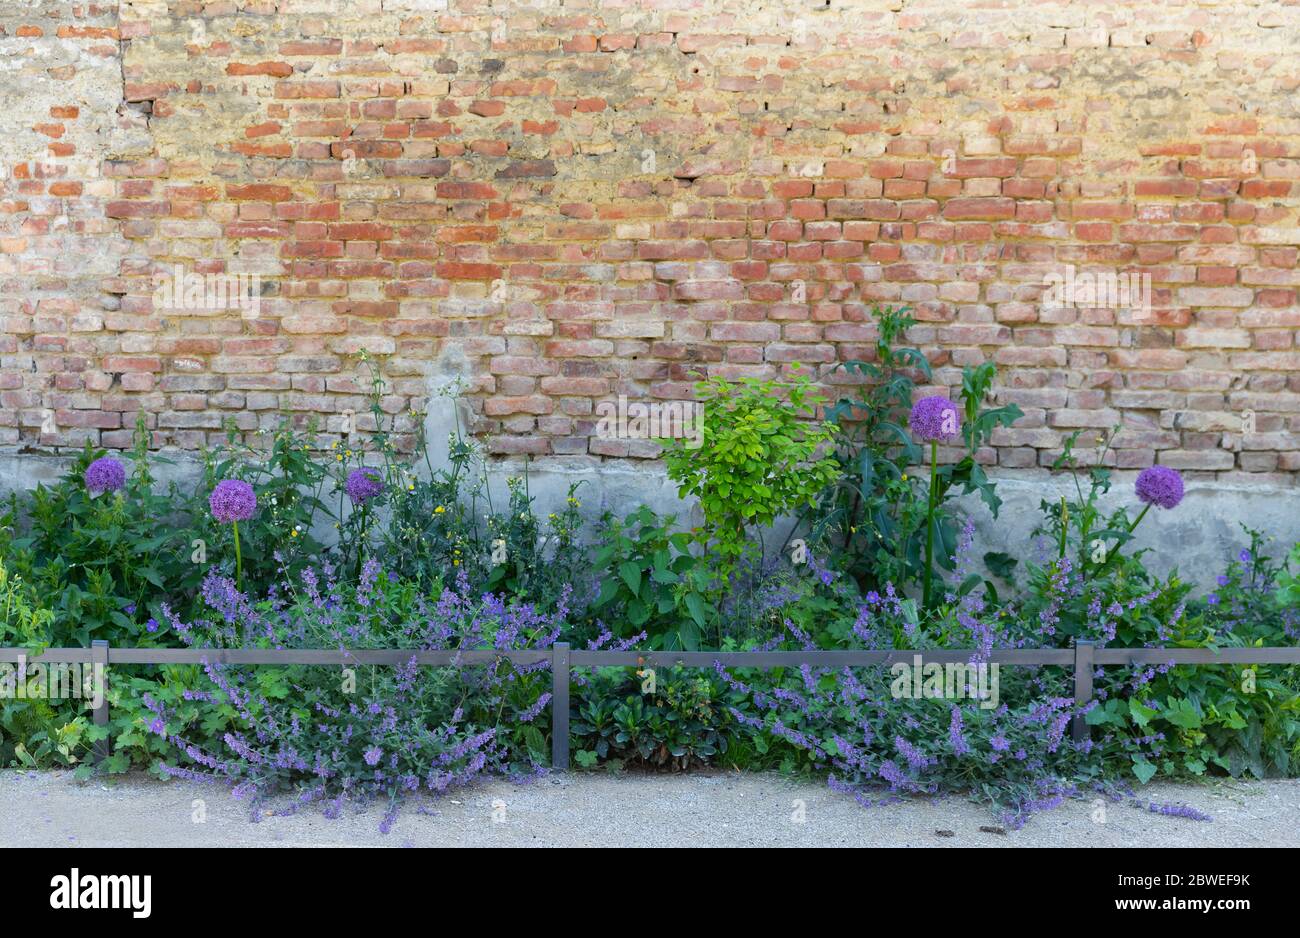 urban gardening with lush purple and violet flowers and a brick wall in the background Stock Photo